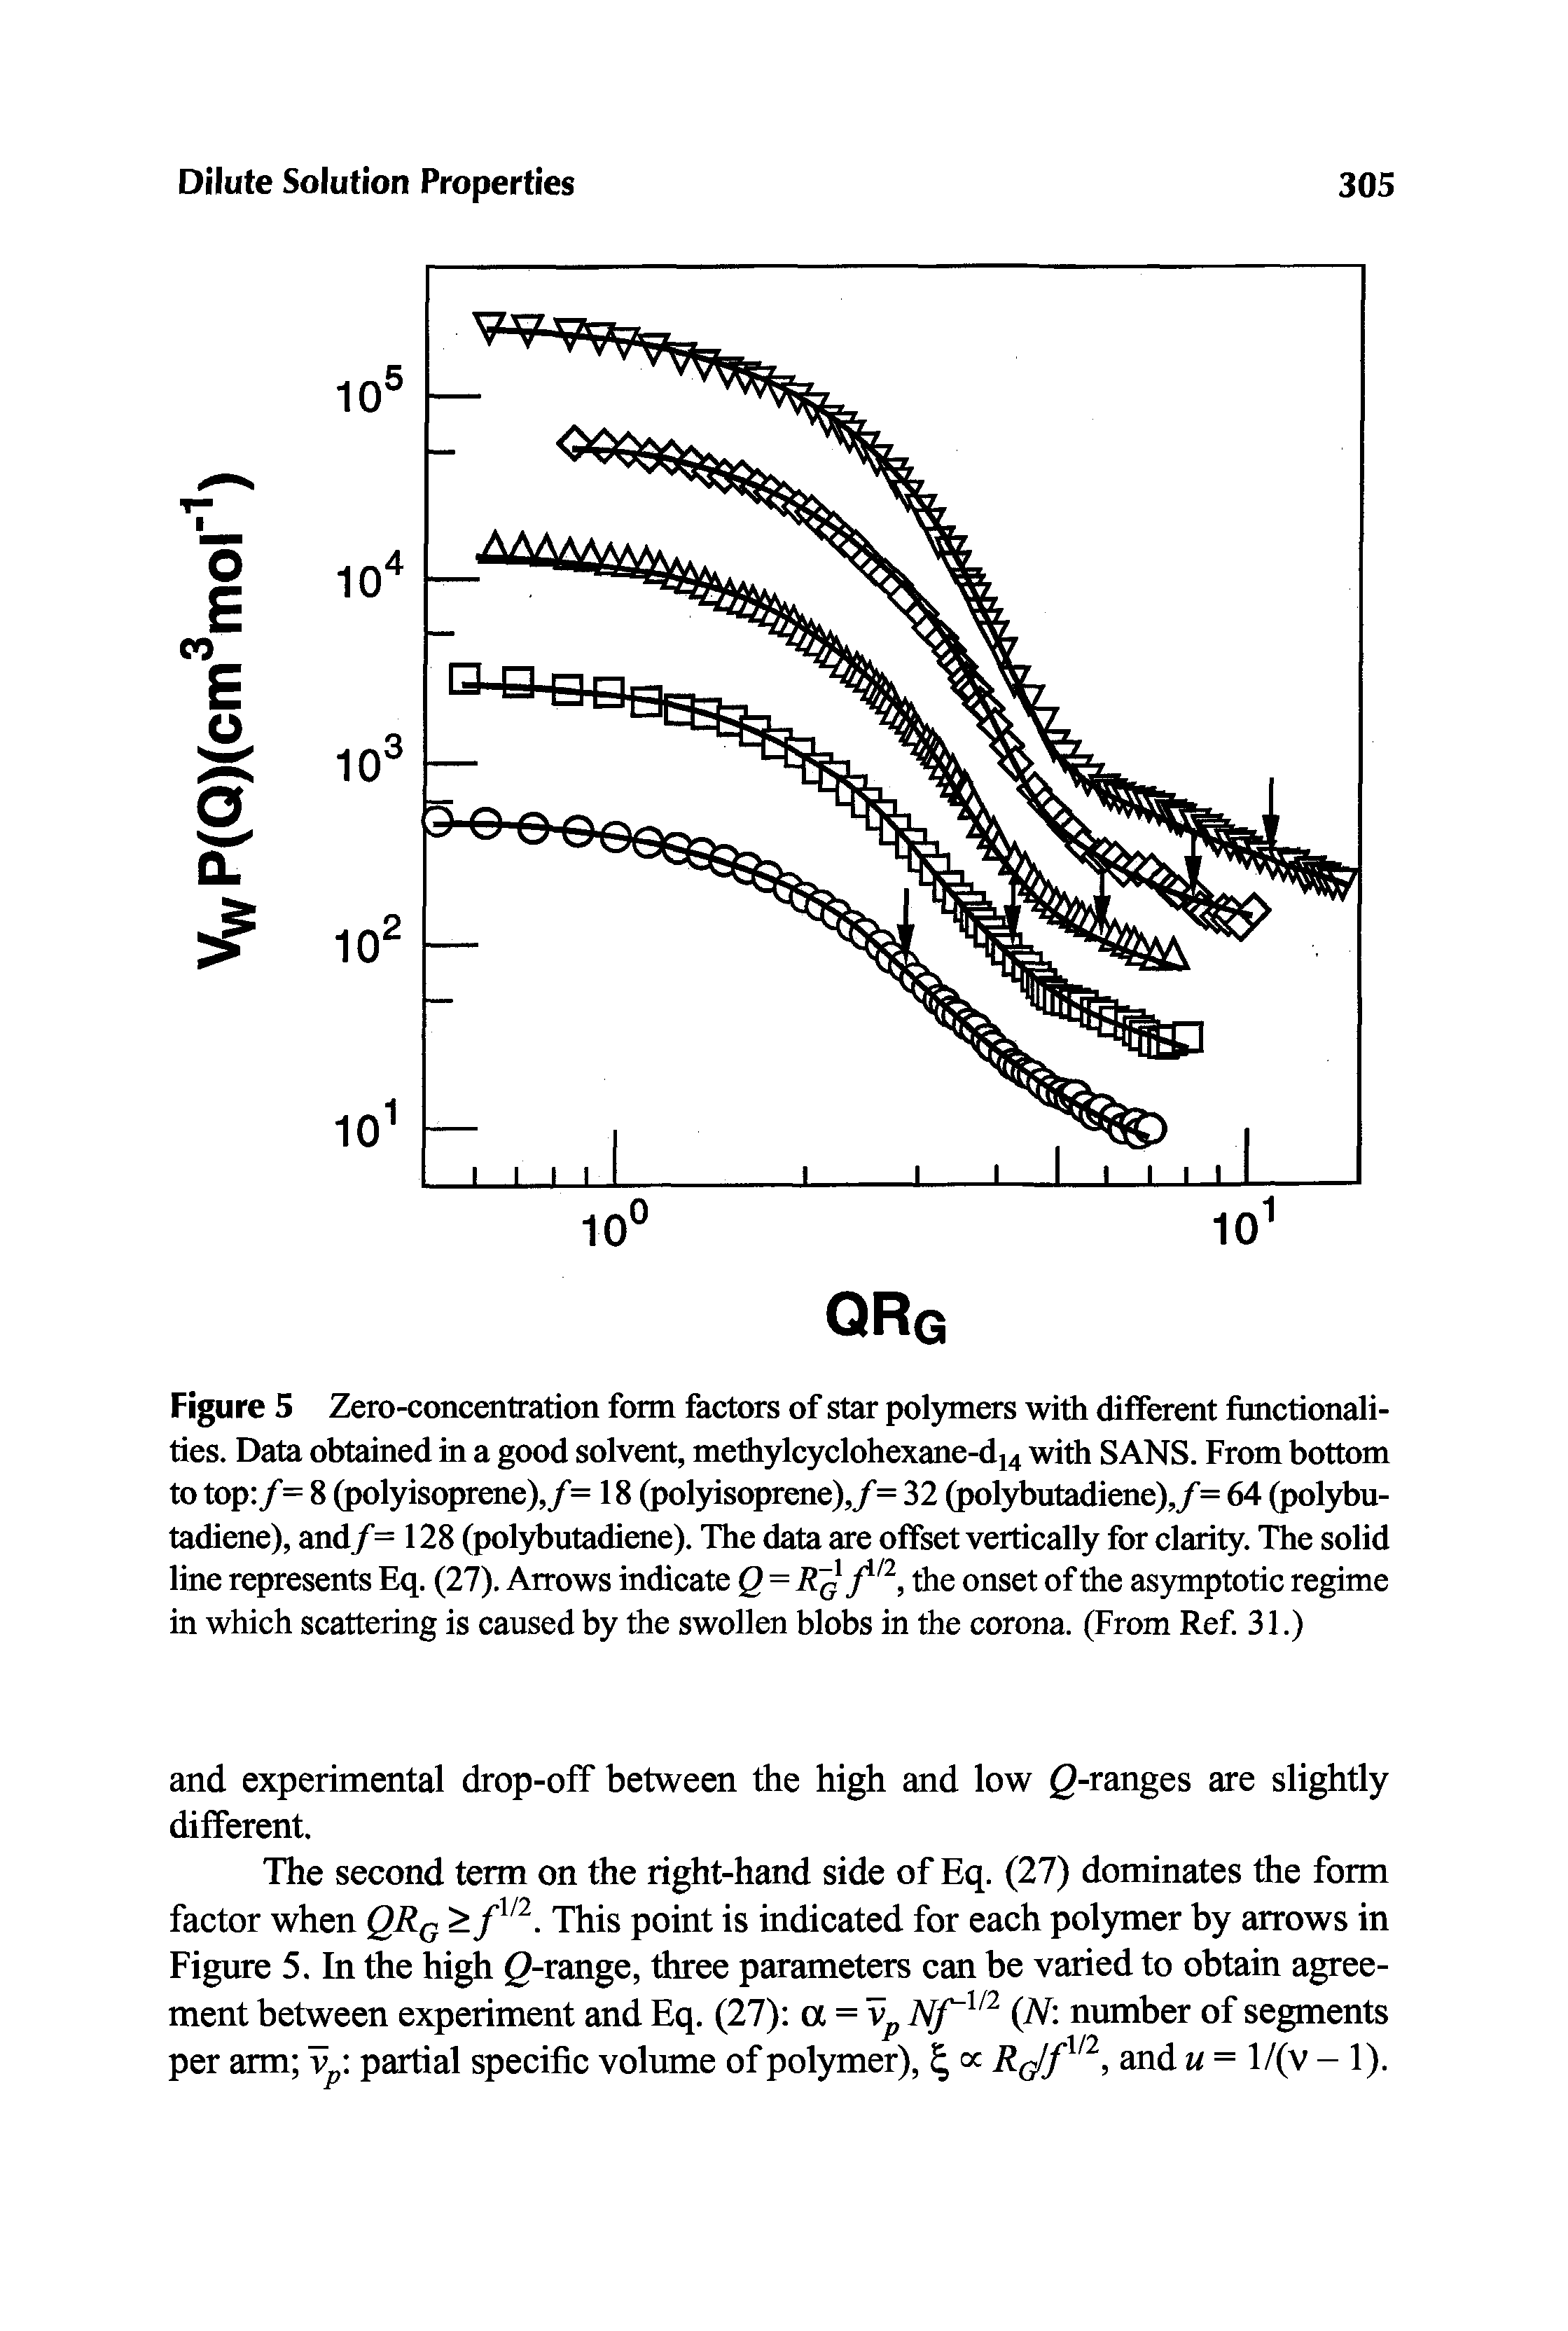 Figure 5 Zero-concentration form factors of star polymers with different functionalities. Data obtained in a good solvent, methylcyclohexane-di4 with SANS. From bottom to top /= 8 (polyisoprene),/=18 (polyisoprene),/= 32 (polybutadiene),/= 64 (polybutadiene), and/= 128 (polybutadiene). The data are offset vertically for clarity. The solid line represents Eq. (27). Arrows indicate Q=the onset of the asymptotic regime in which scattering is caused by the swollen blobs in the corona. (From Ref 31.)...